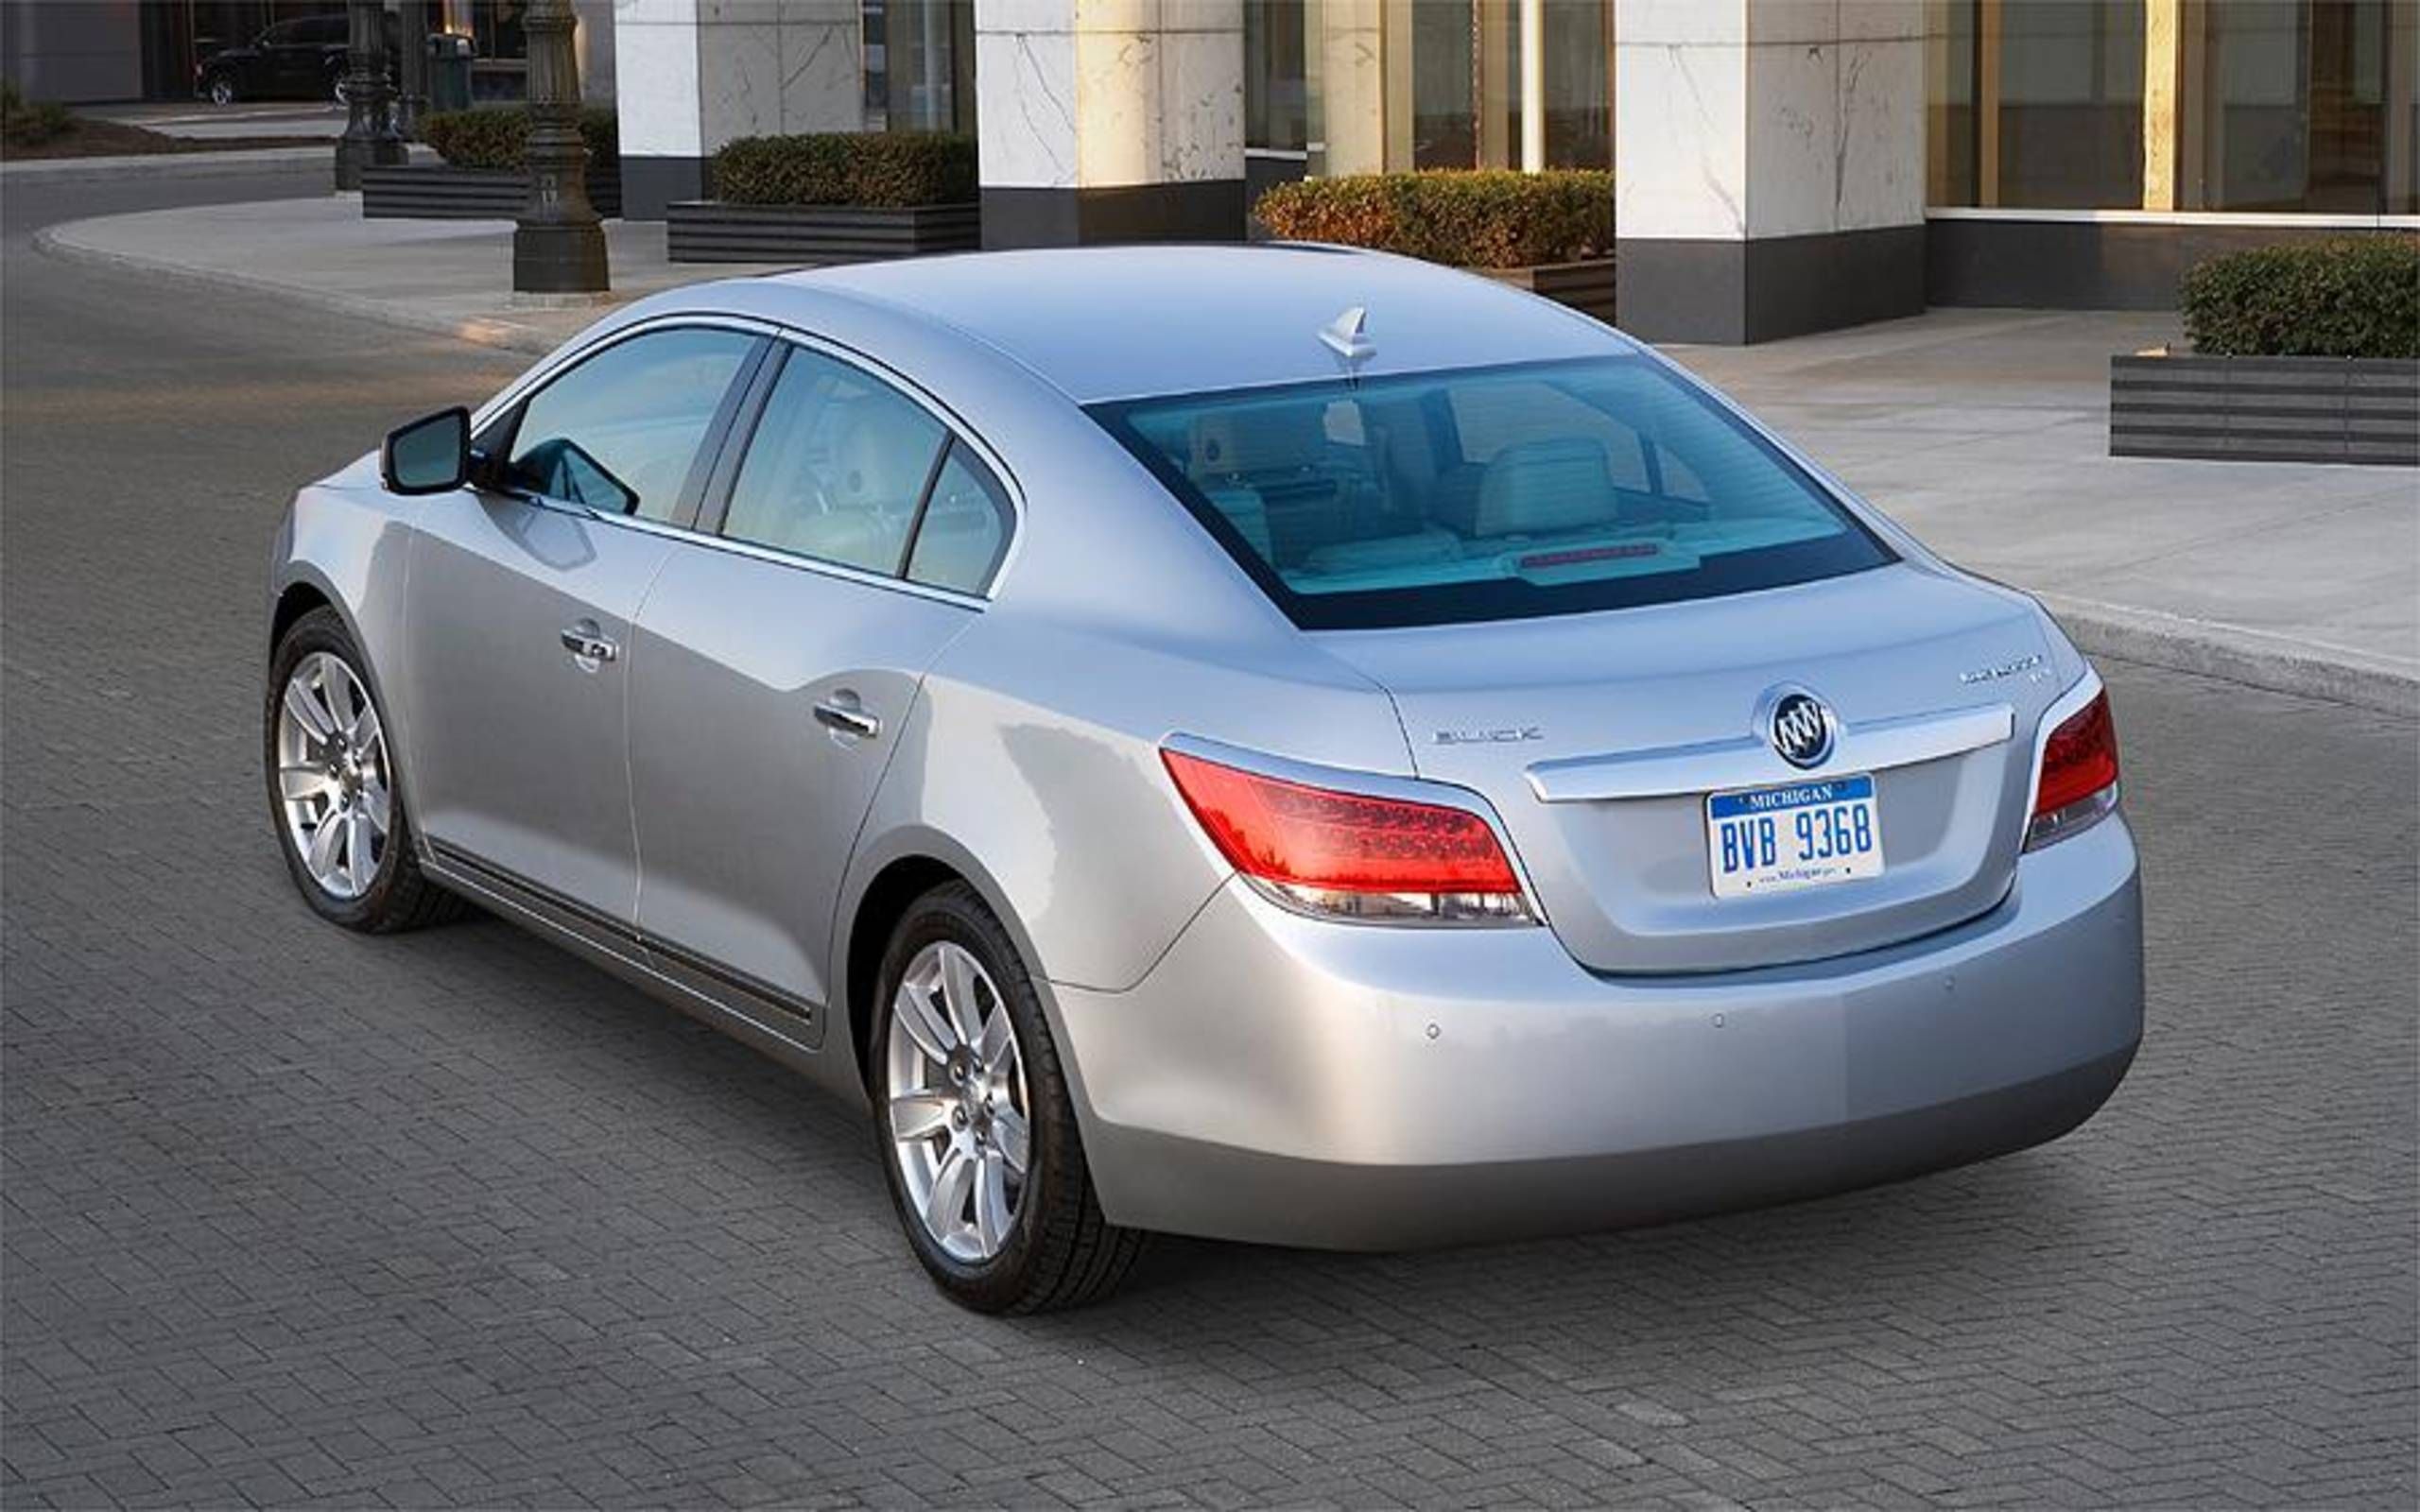 2010 Buick LaCrosse sets a new tone for the brand